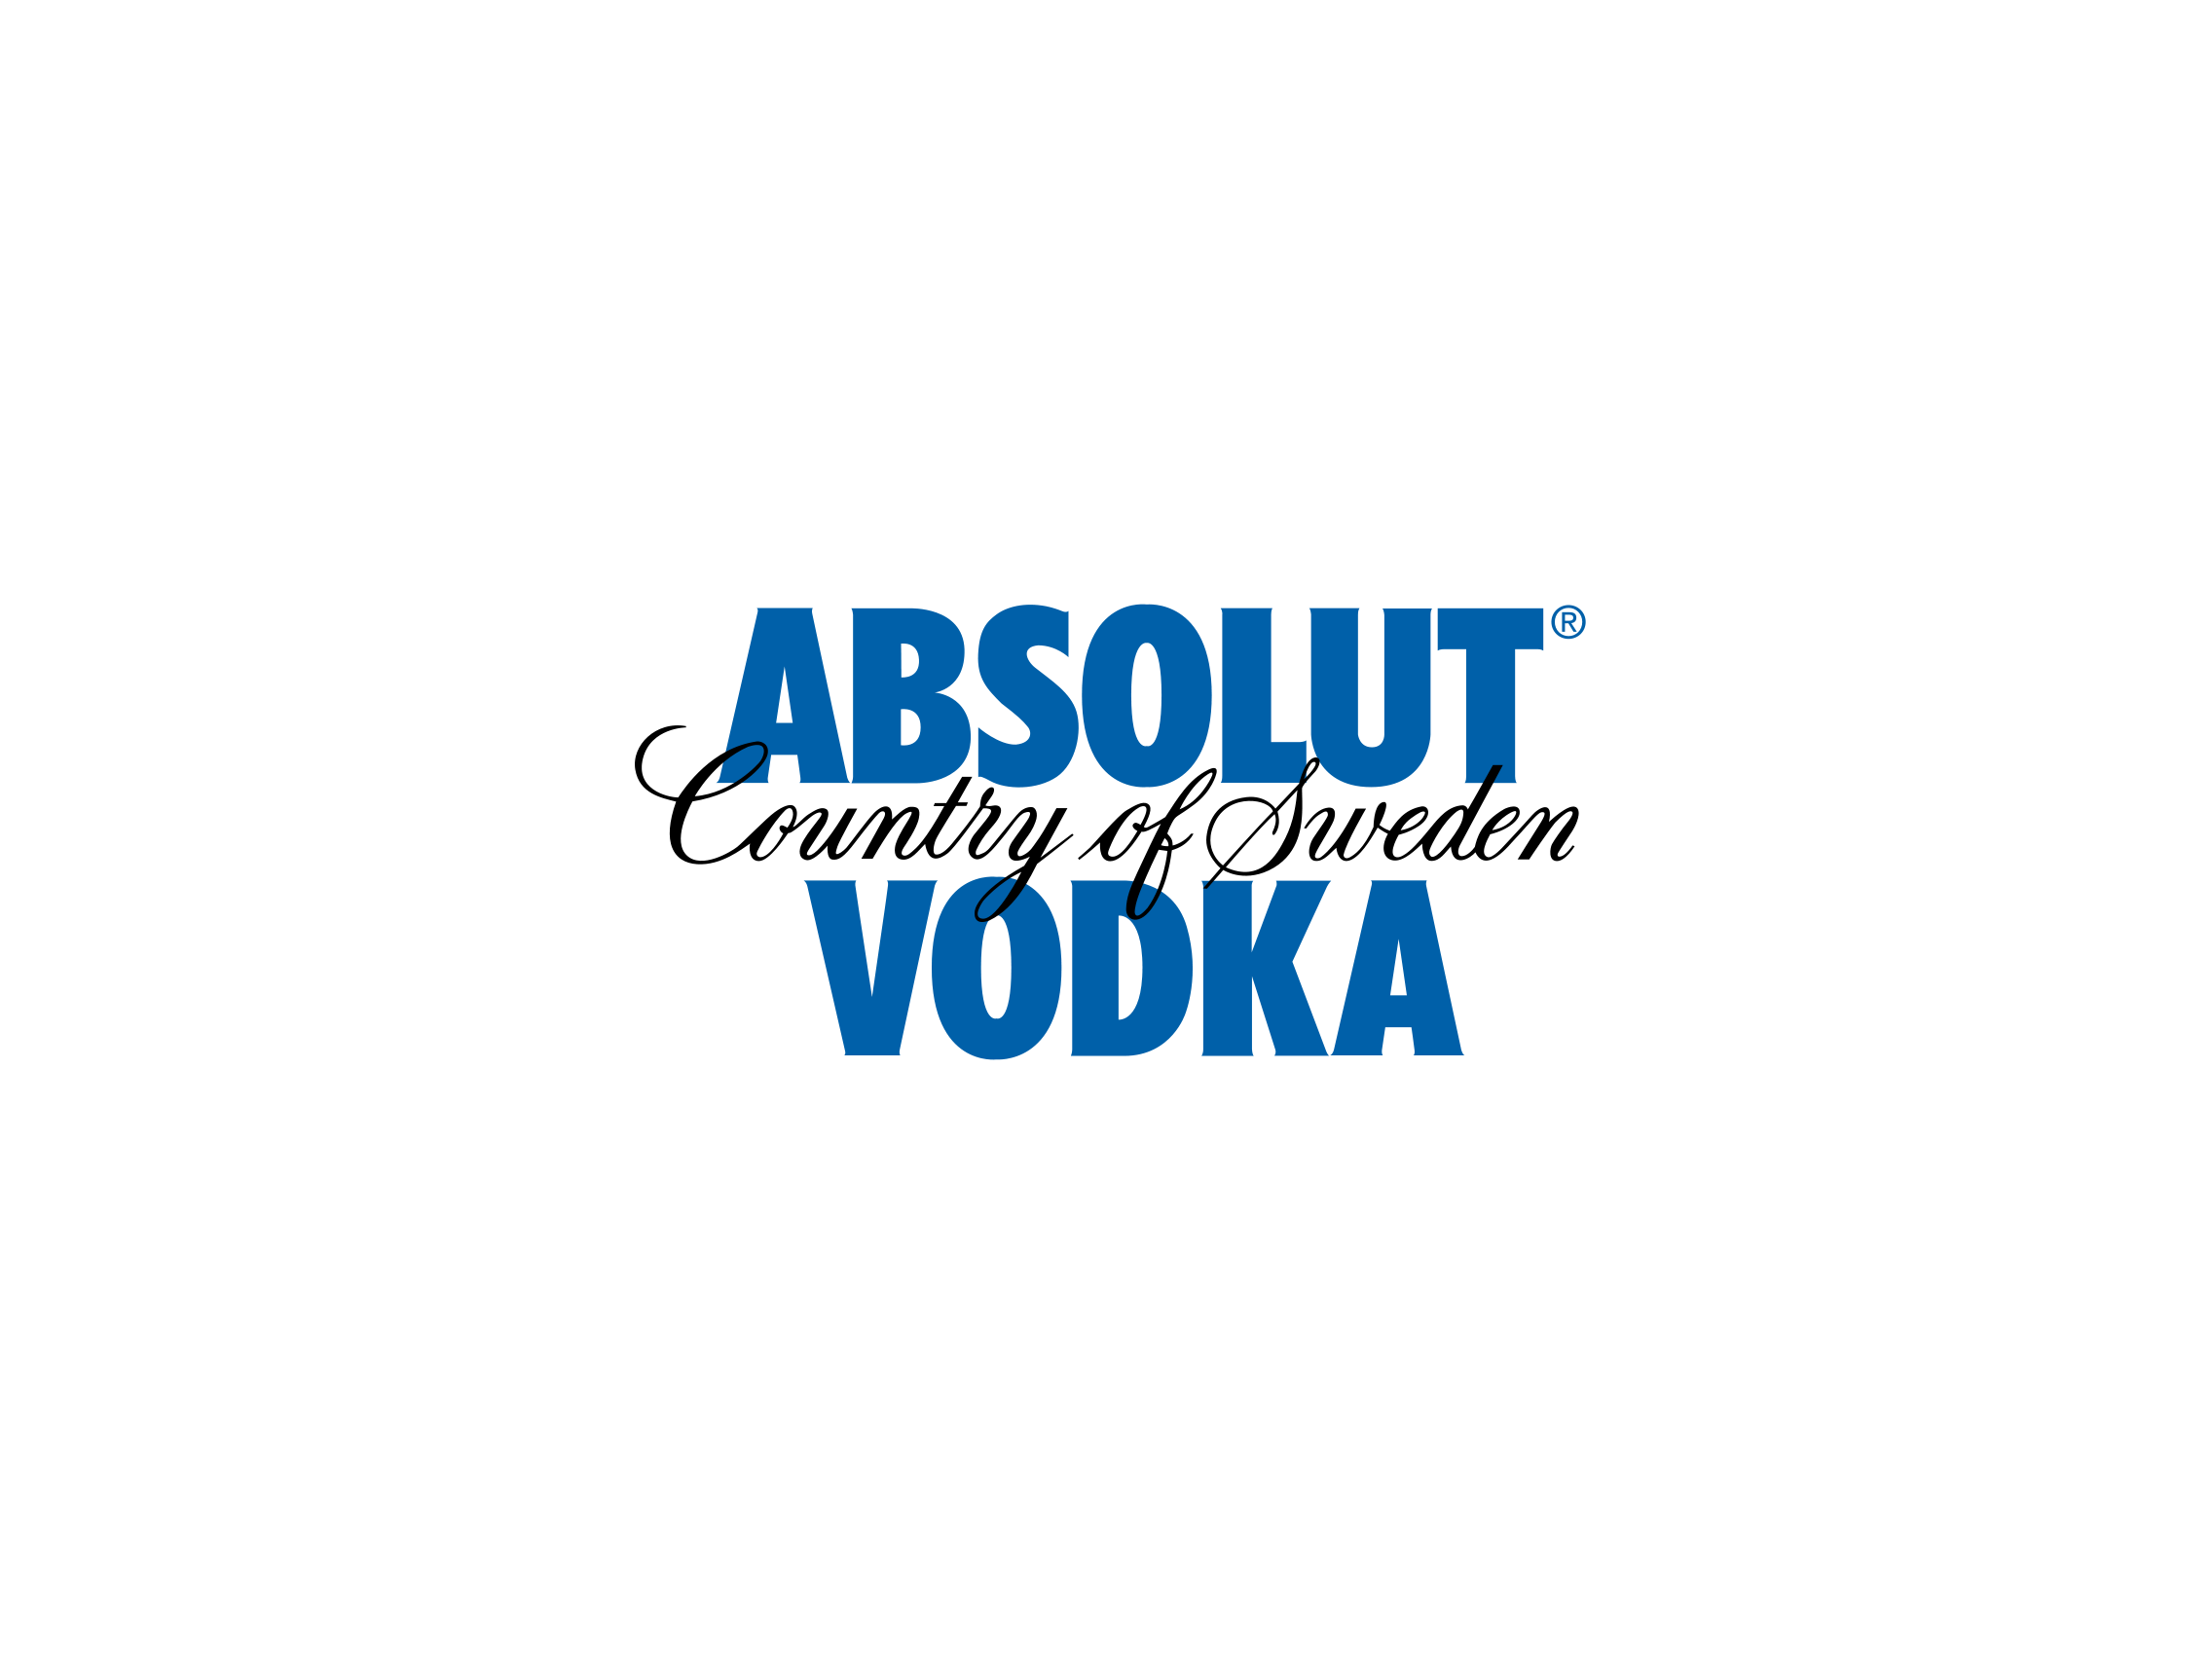 Absolut uses the font Futura 